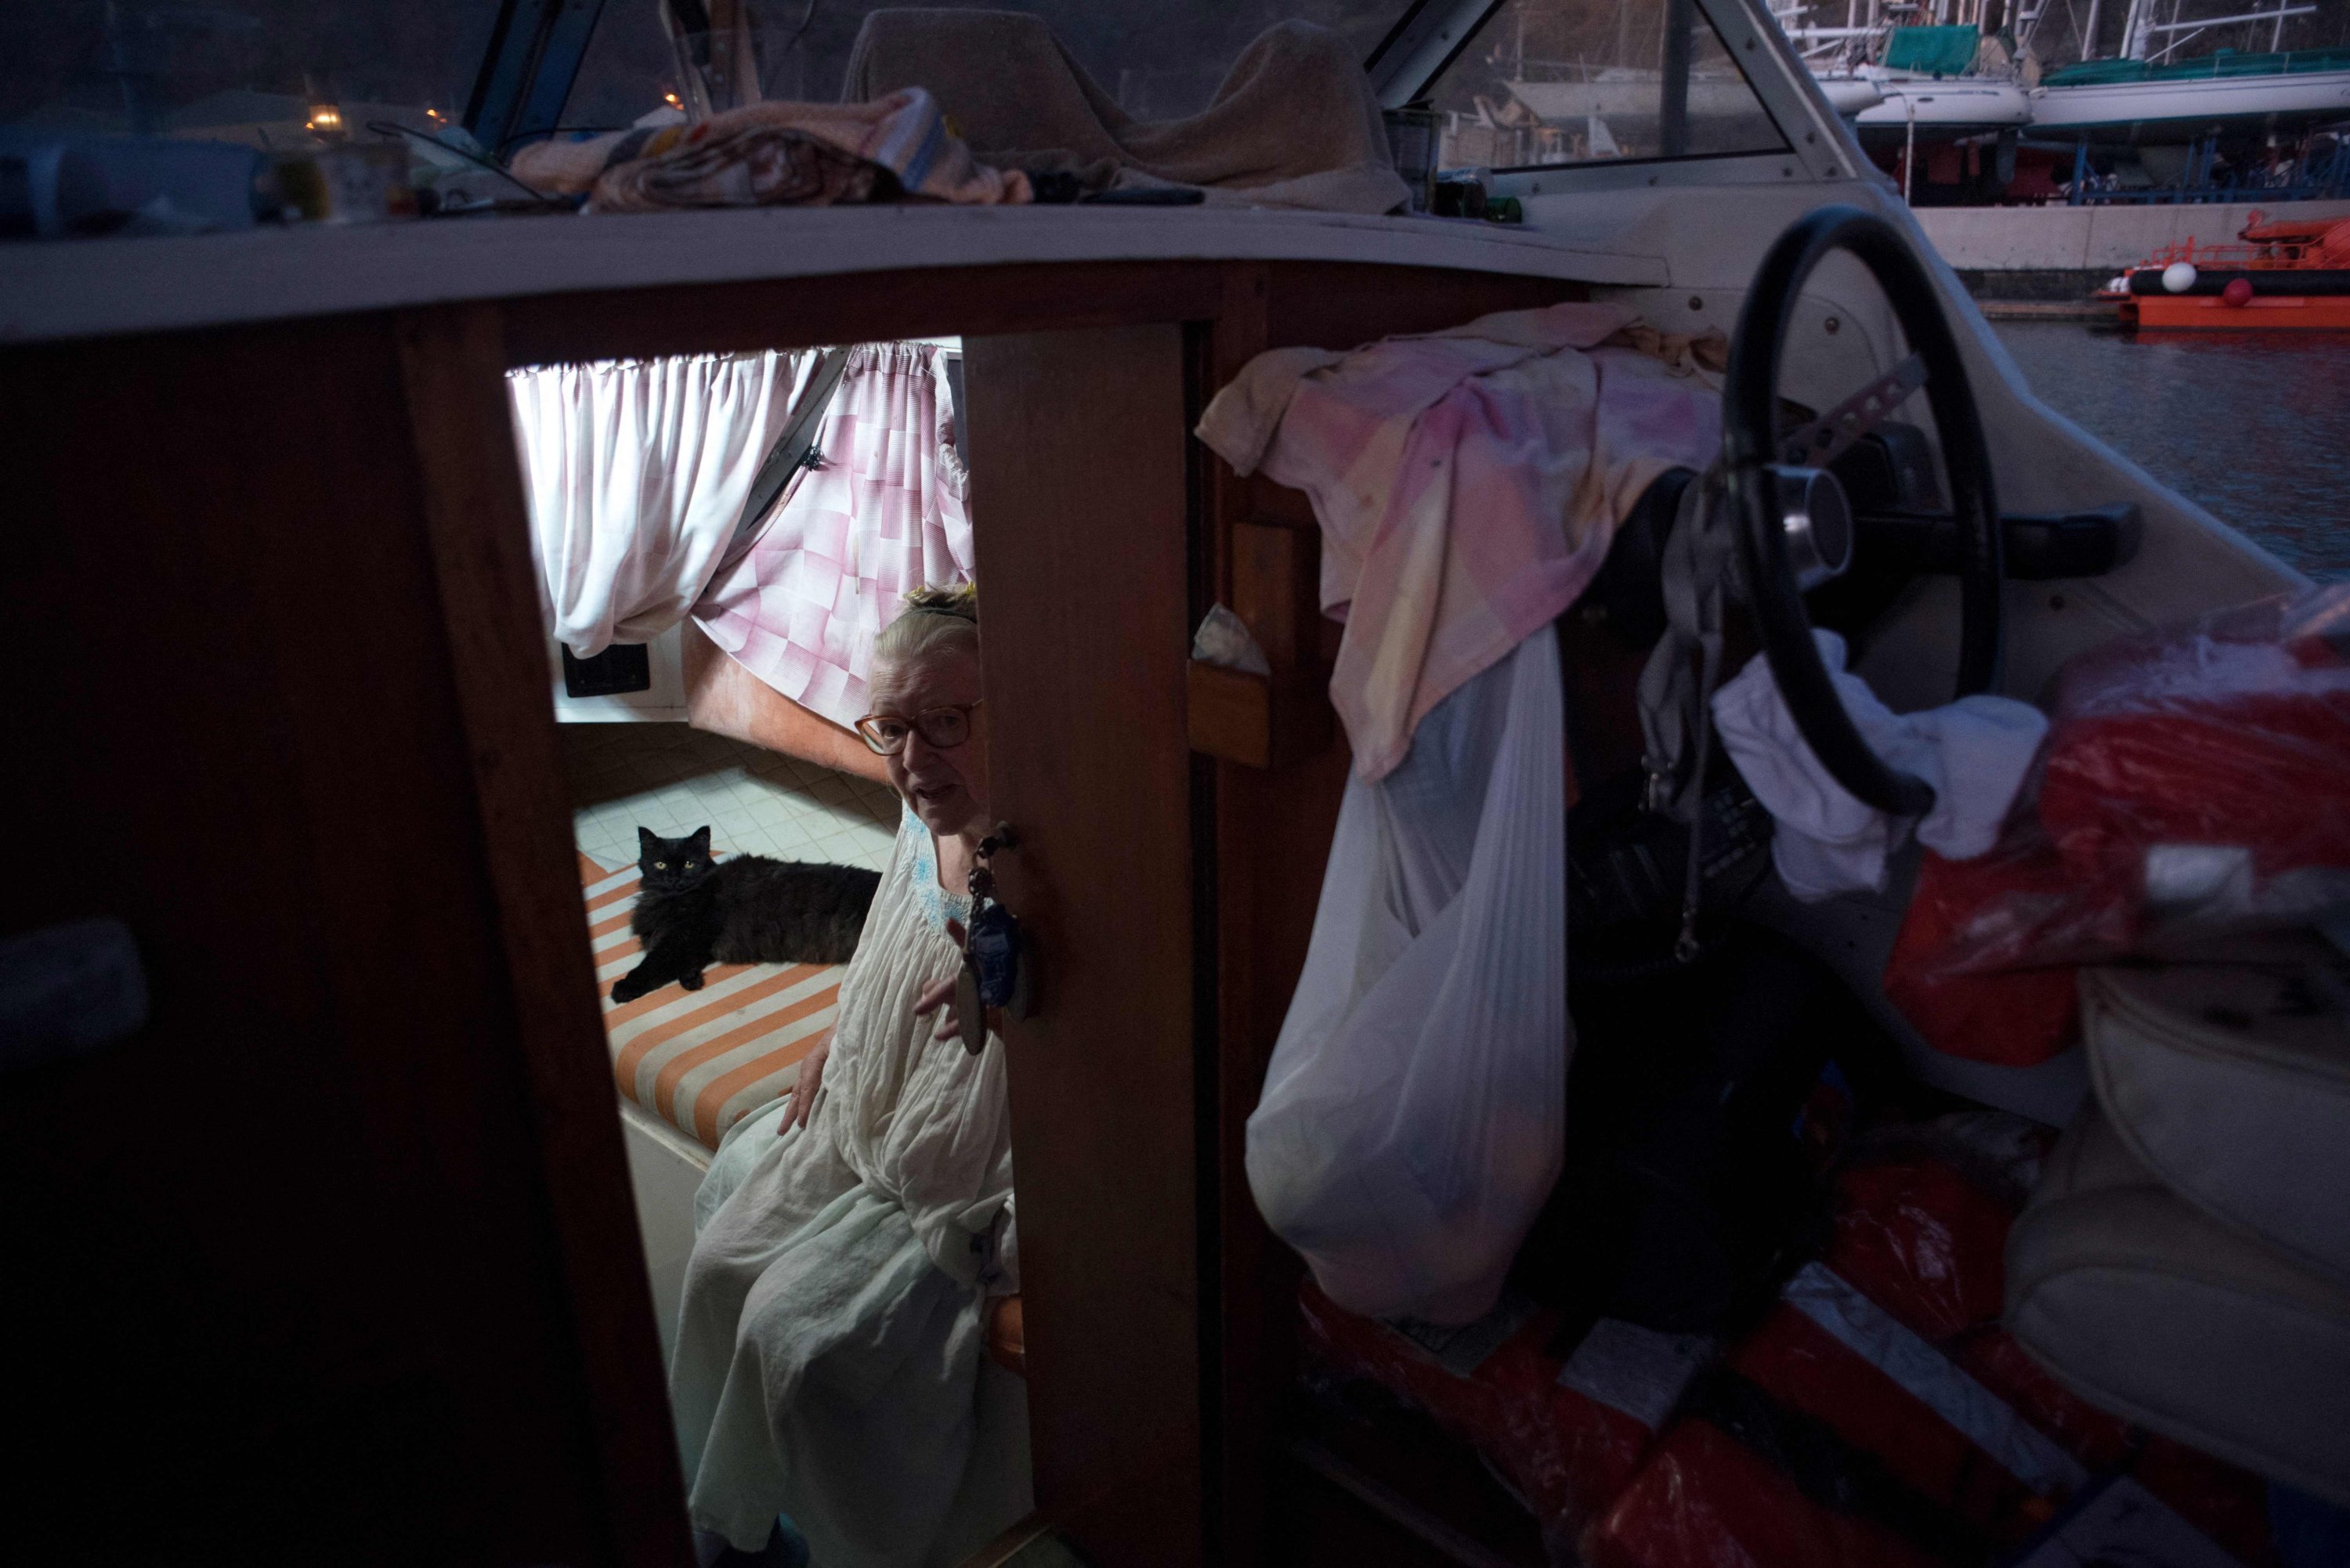 Margaretha, 80, sits next to her cat on the boat where she and her husband have settled after fleeing their home after the eruption of the Cumbre Vieja volcano, in the port of Tazacorte, on La Palma, Spain, Oct. 3, 2021. (AFP Photo)